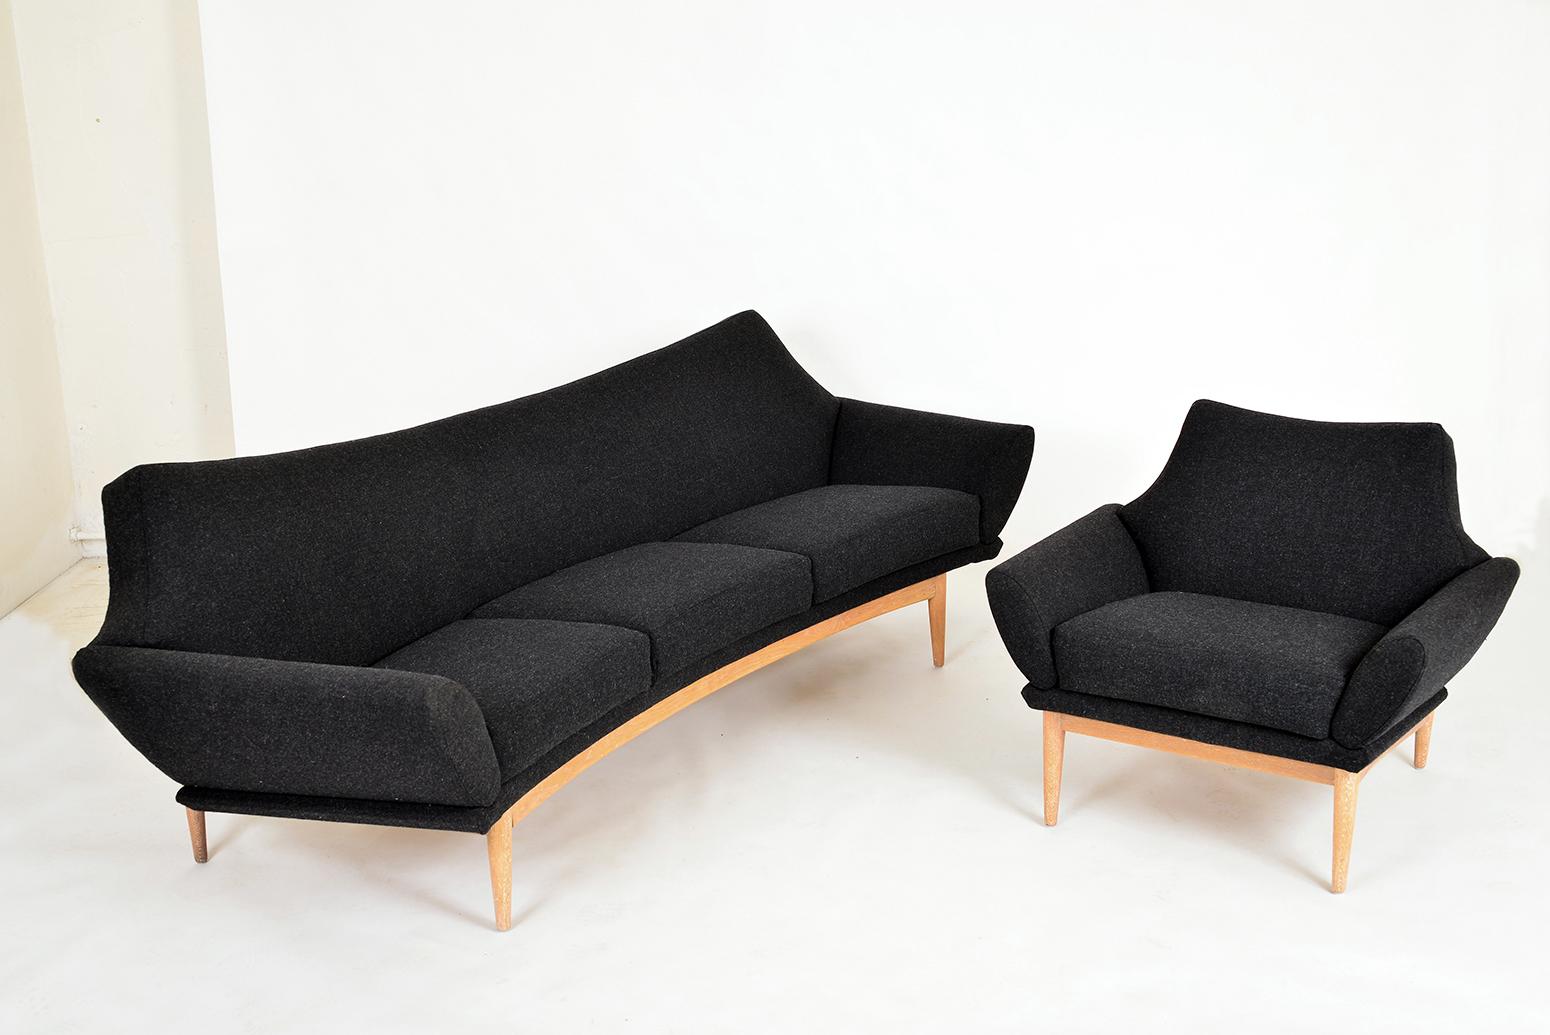 Rare, and seriously striking curved three-seat sofa and matching armchair designed in 1960 by Danish designer Johannes Andersen for little-known Swedish company Trensums.
This design is called the “Hollywood”, and features an organic limed oak